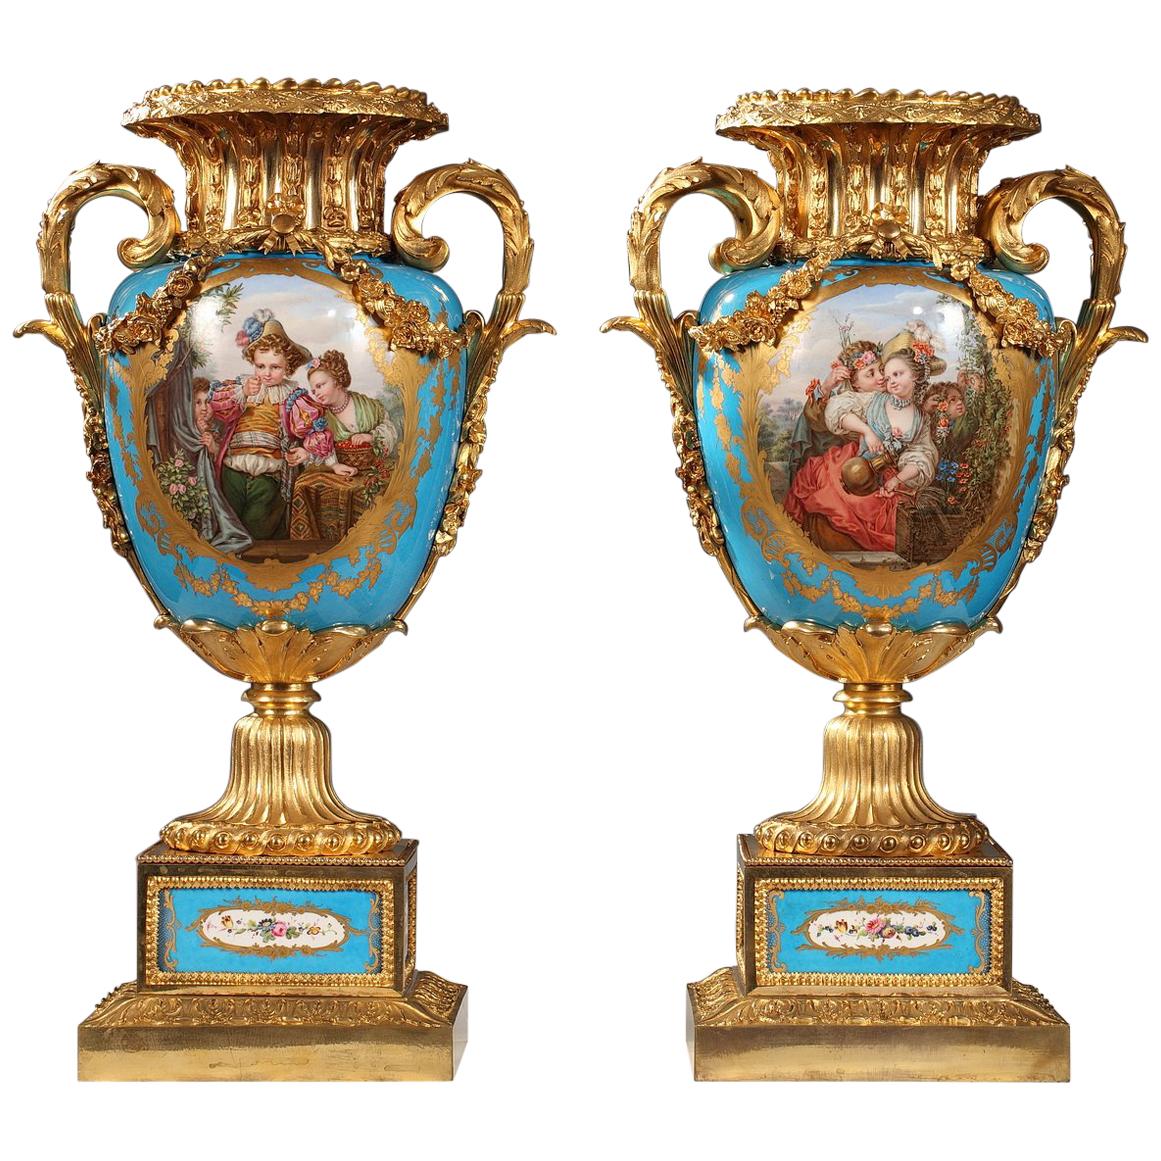 Refined Pair of Porcelain and Gilded Bronze Louis XVI Style "Sèvres" Vases